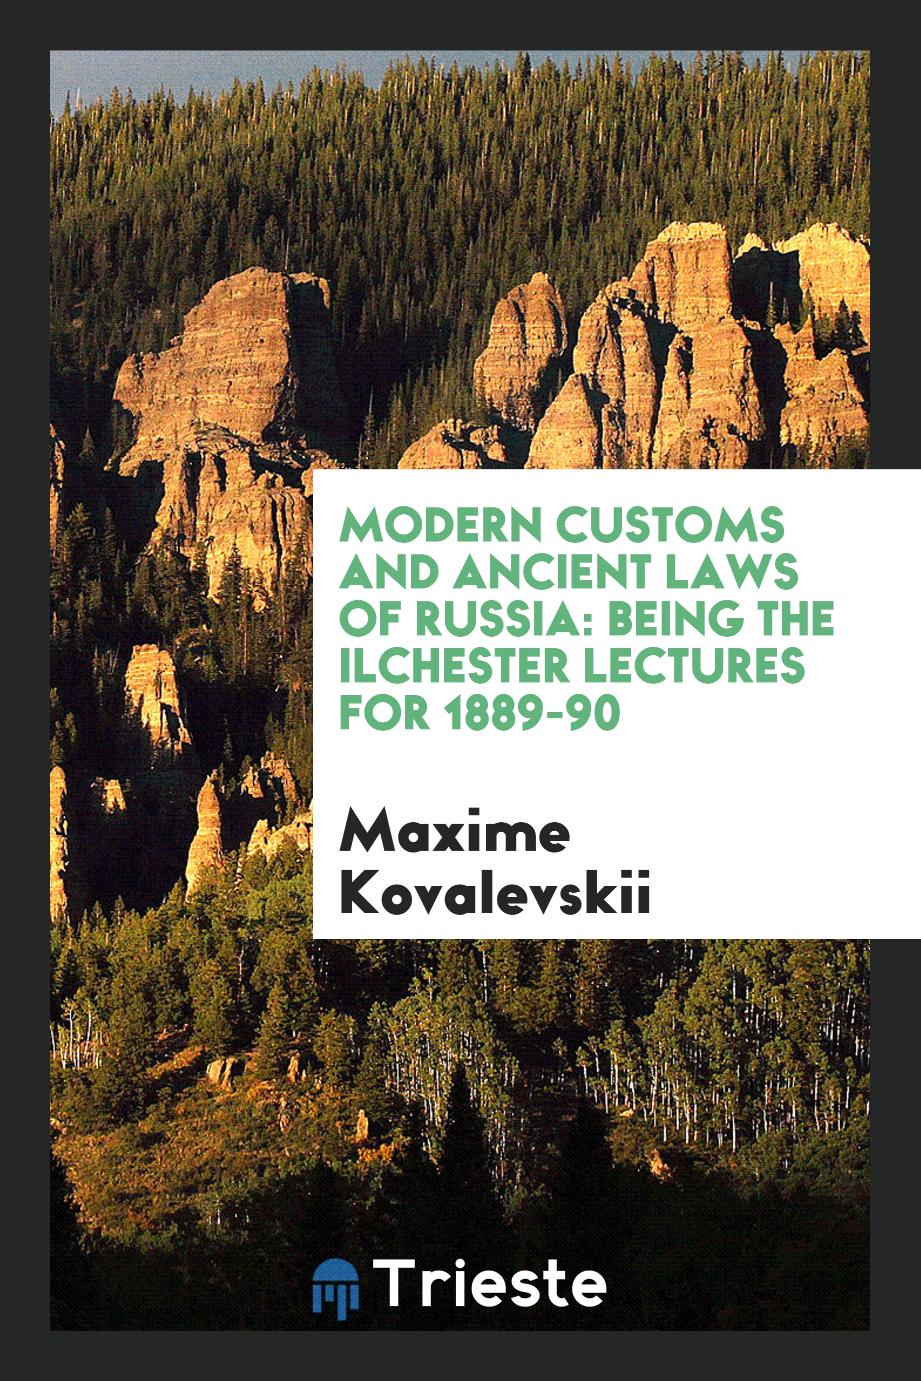 Modern customs and ancient laws of Russia: being the Ilchester lectures for 1889-90